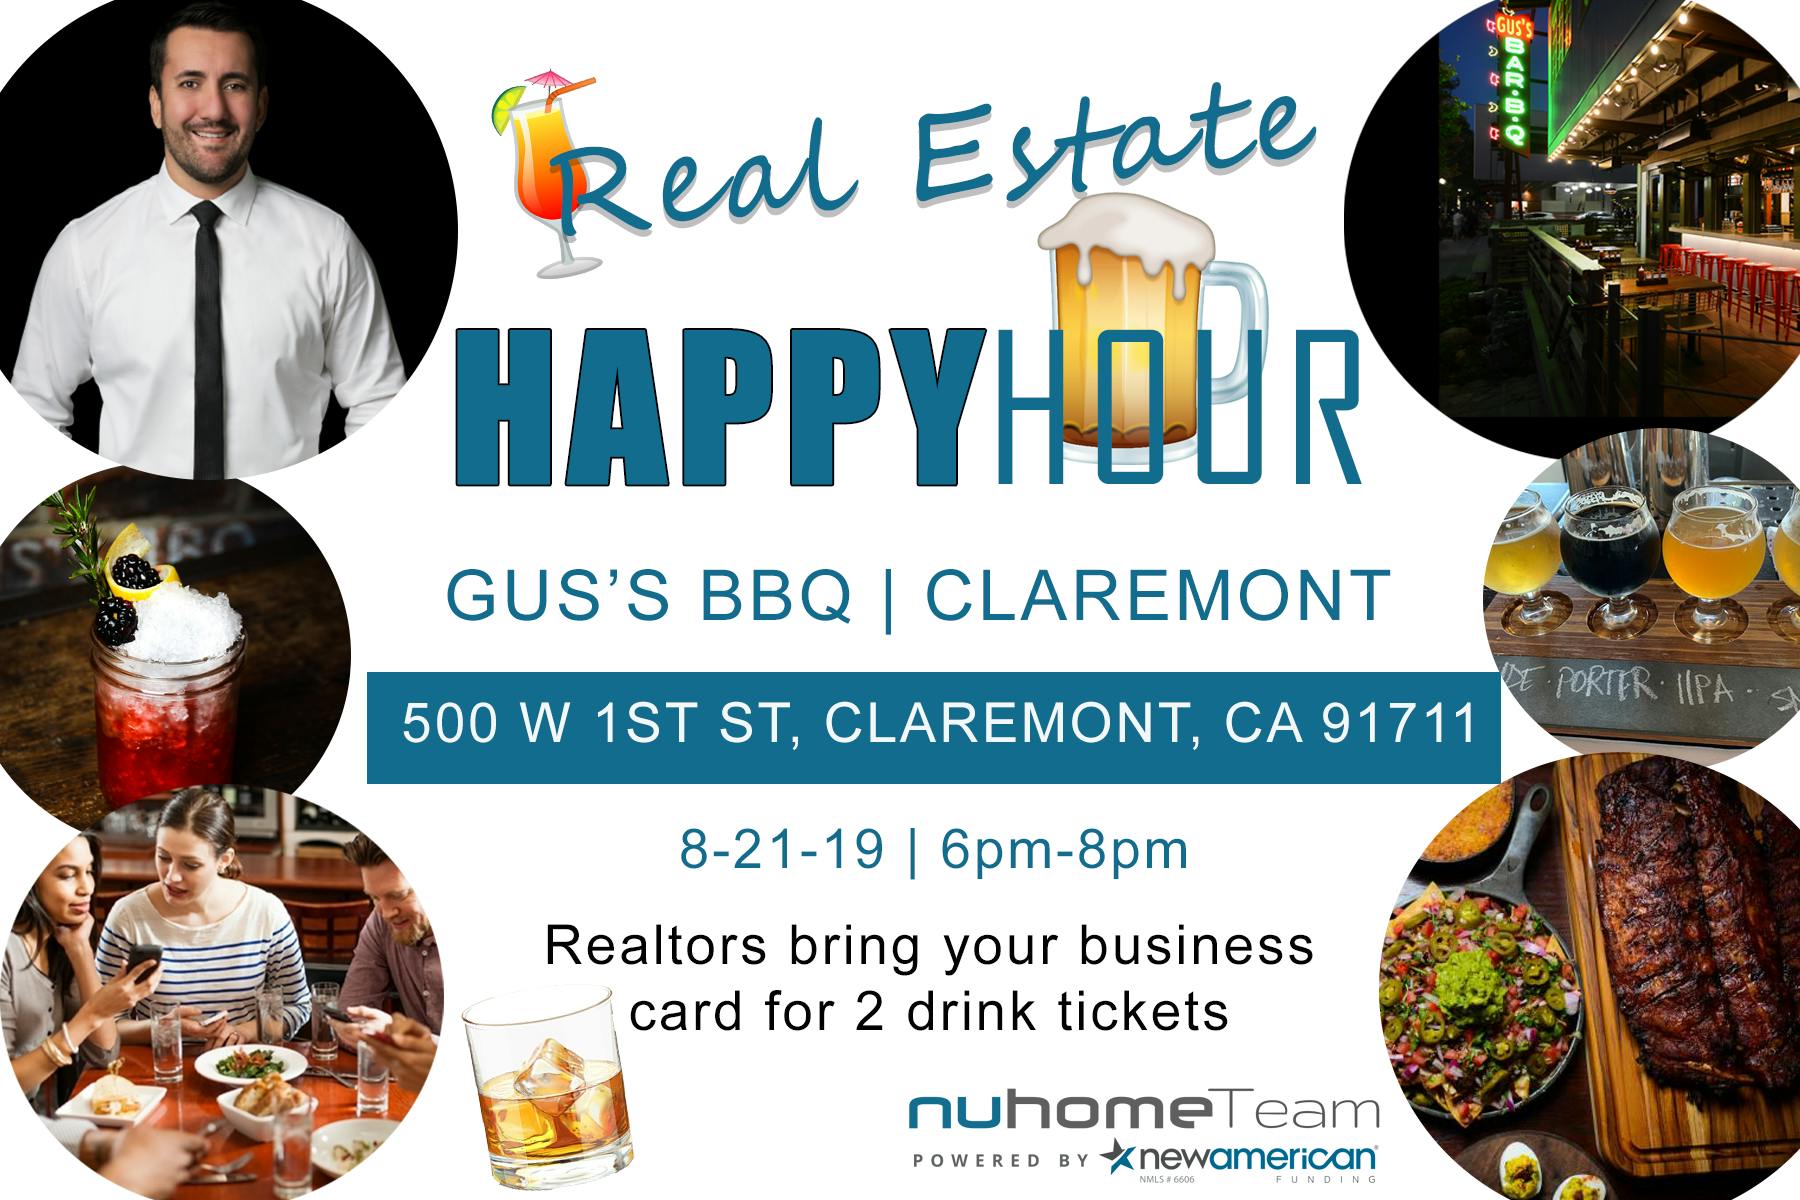 Real Estate Happy Hour Event At Gus's BBQ